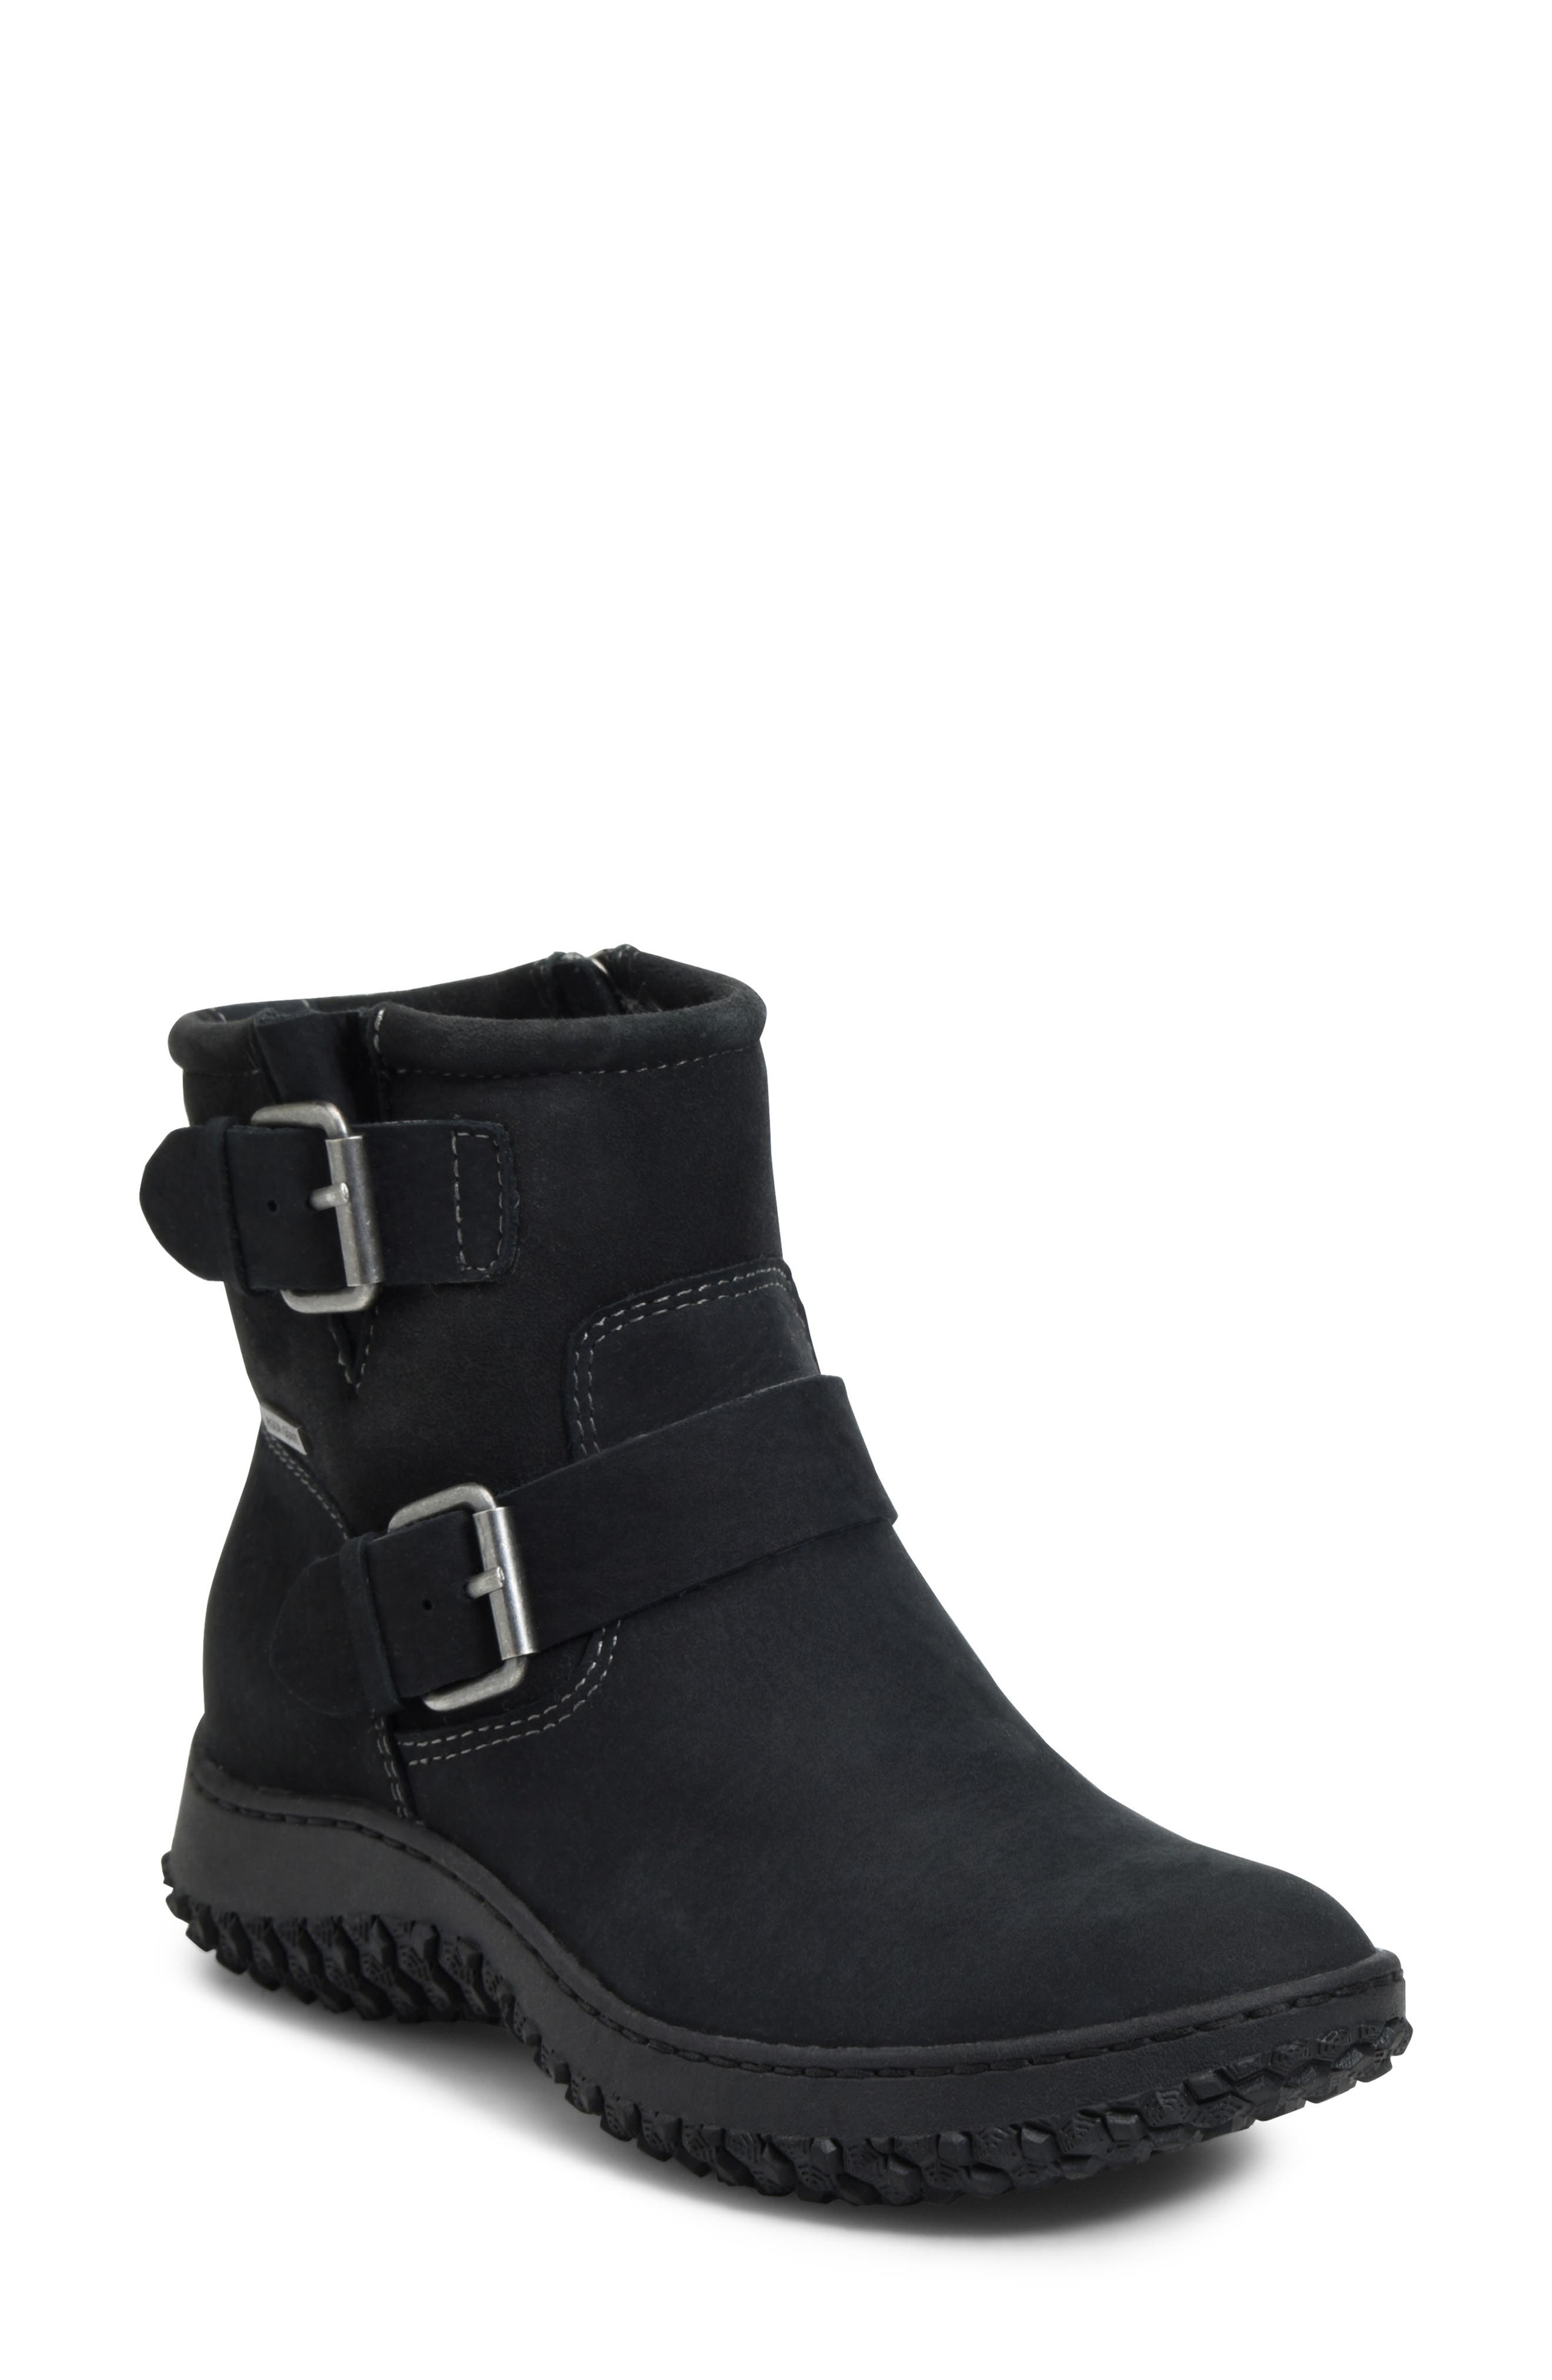 sofft booties sale